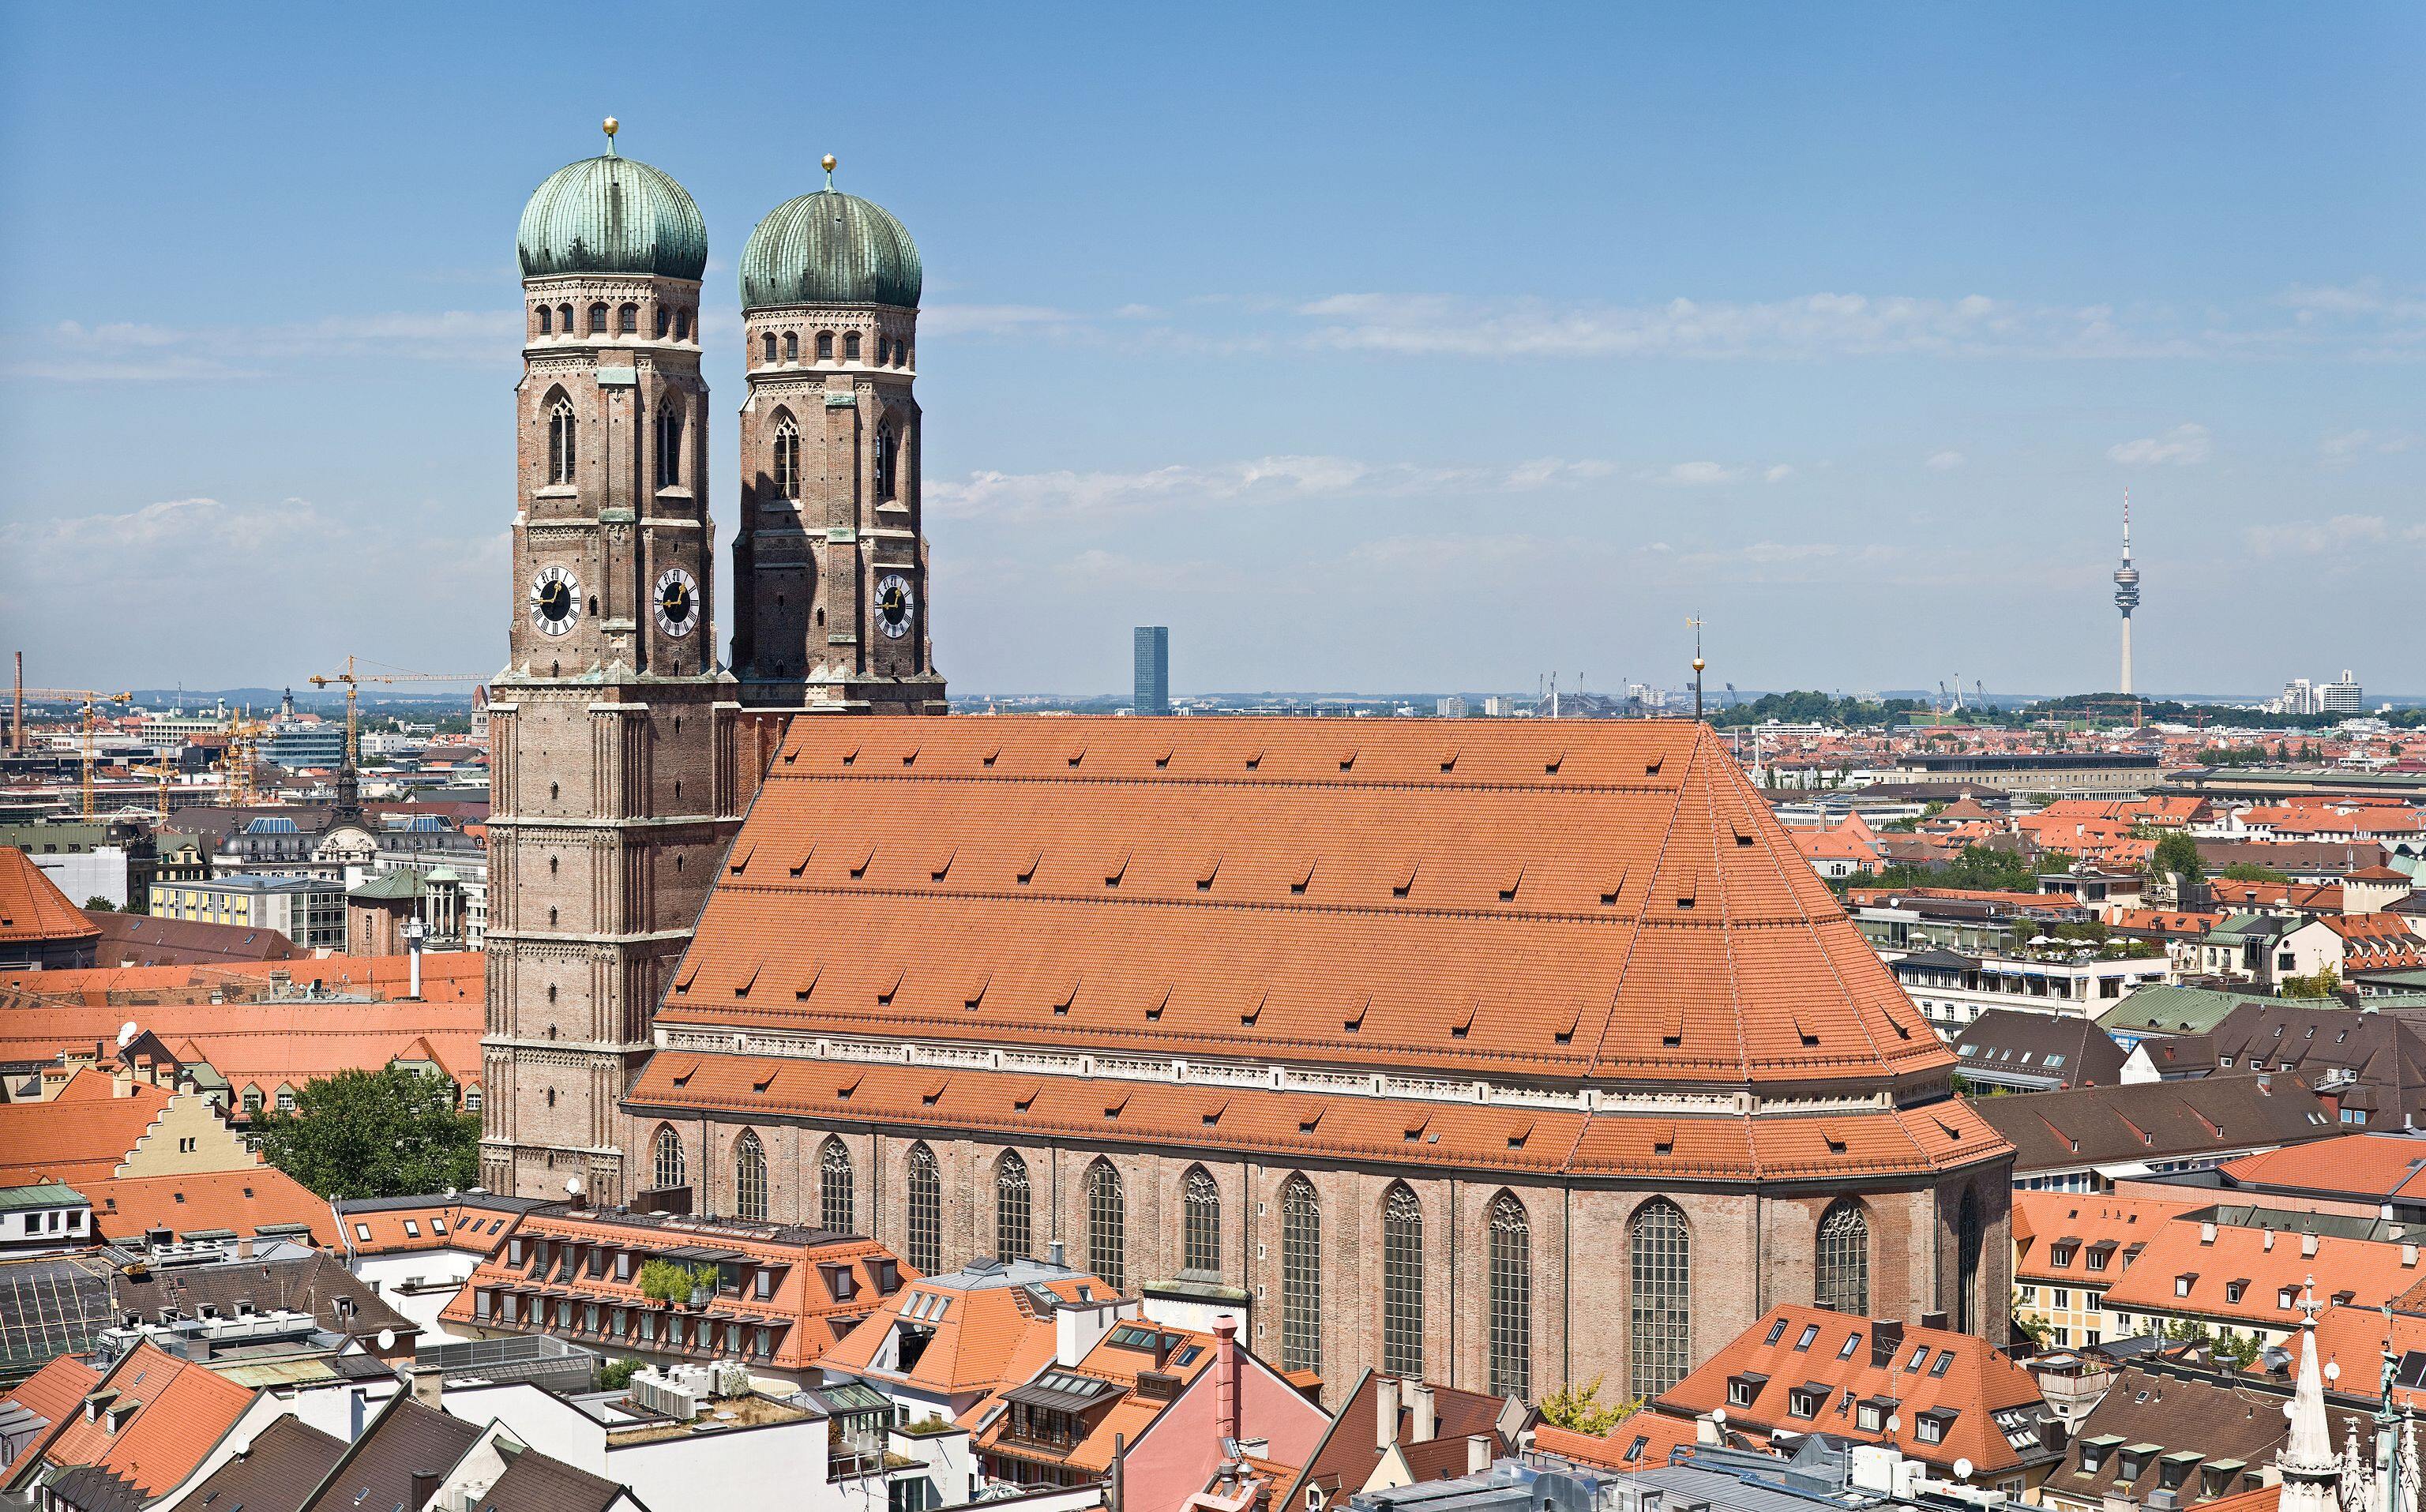 Frauenkirche (Church of Our Blessed Lady) in Munich, Germany, as viewed from the tower of Peter's Church. Taken by myself with a Canon 5D and 24-105mm f/4L IS lens.